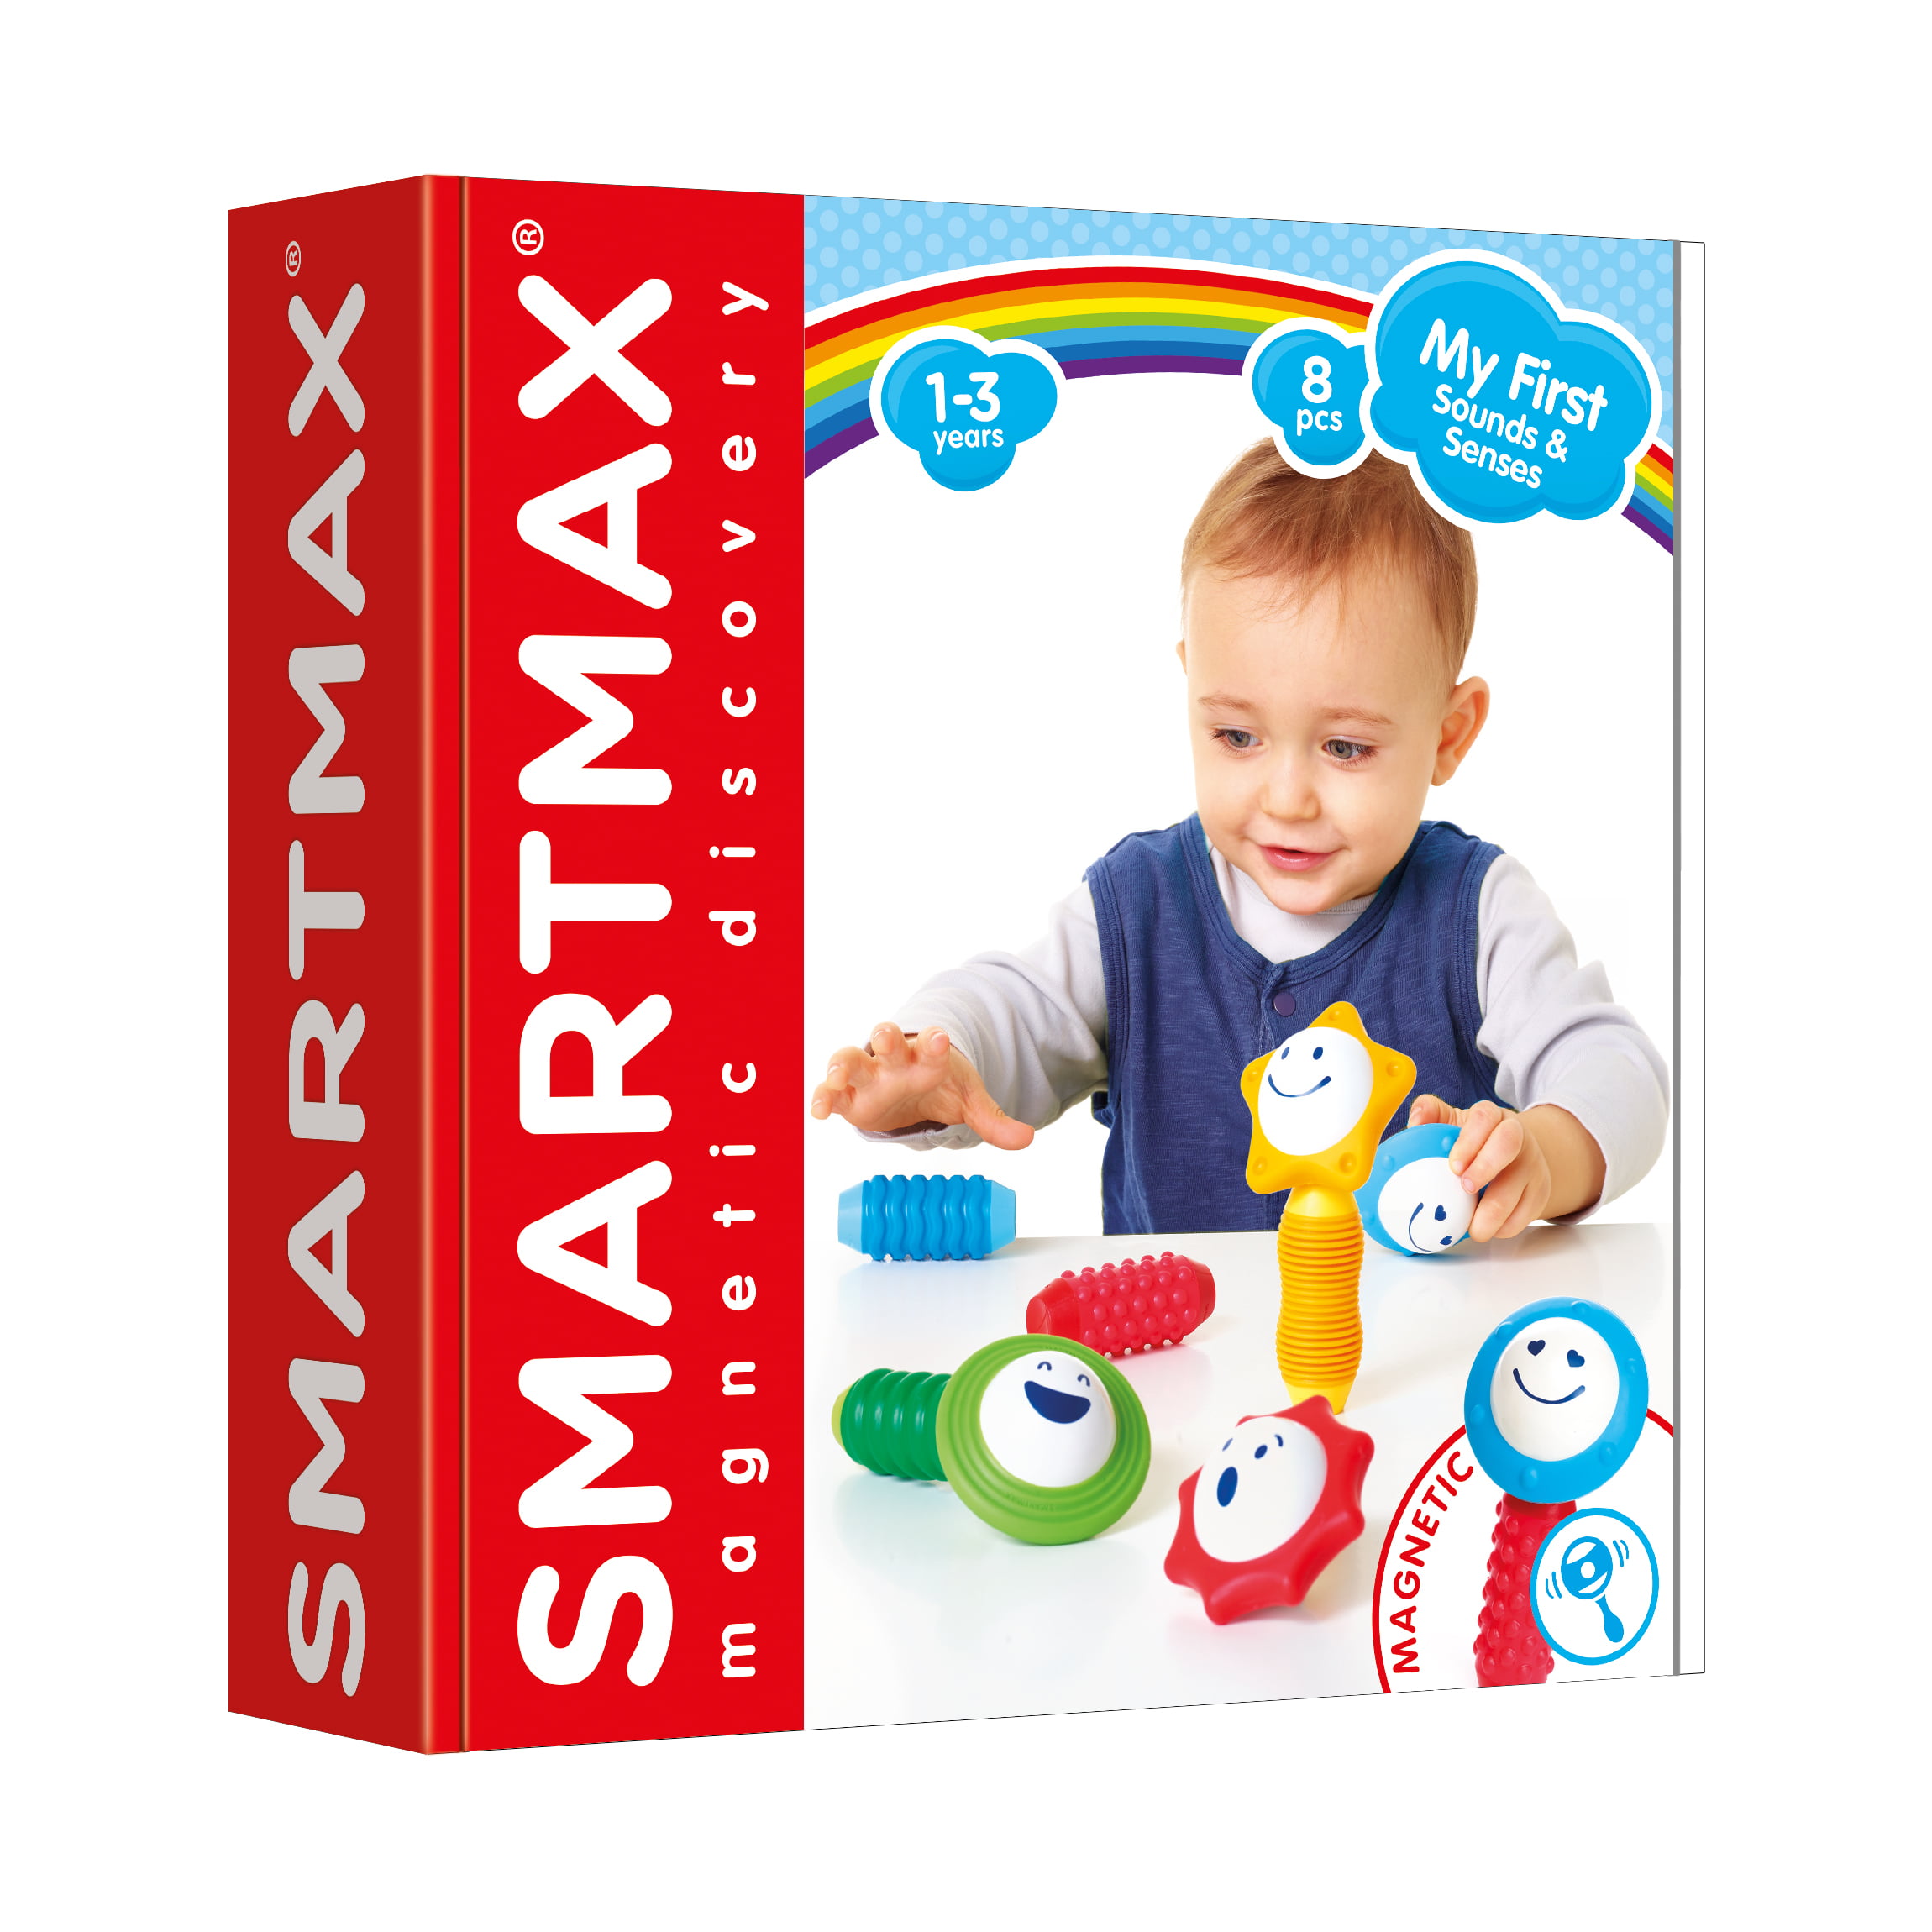 SmartMax My First Dinosaurs Magnetic Set 14 Pcs for sale online 